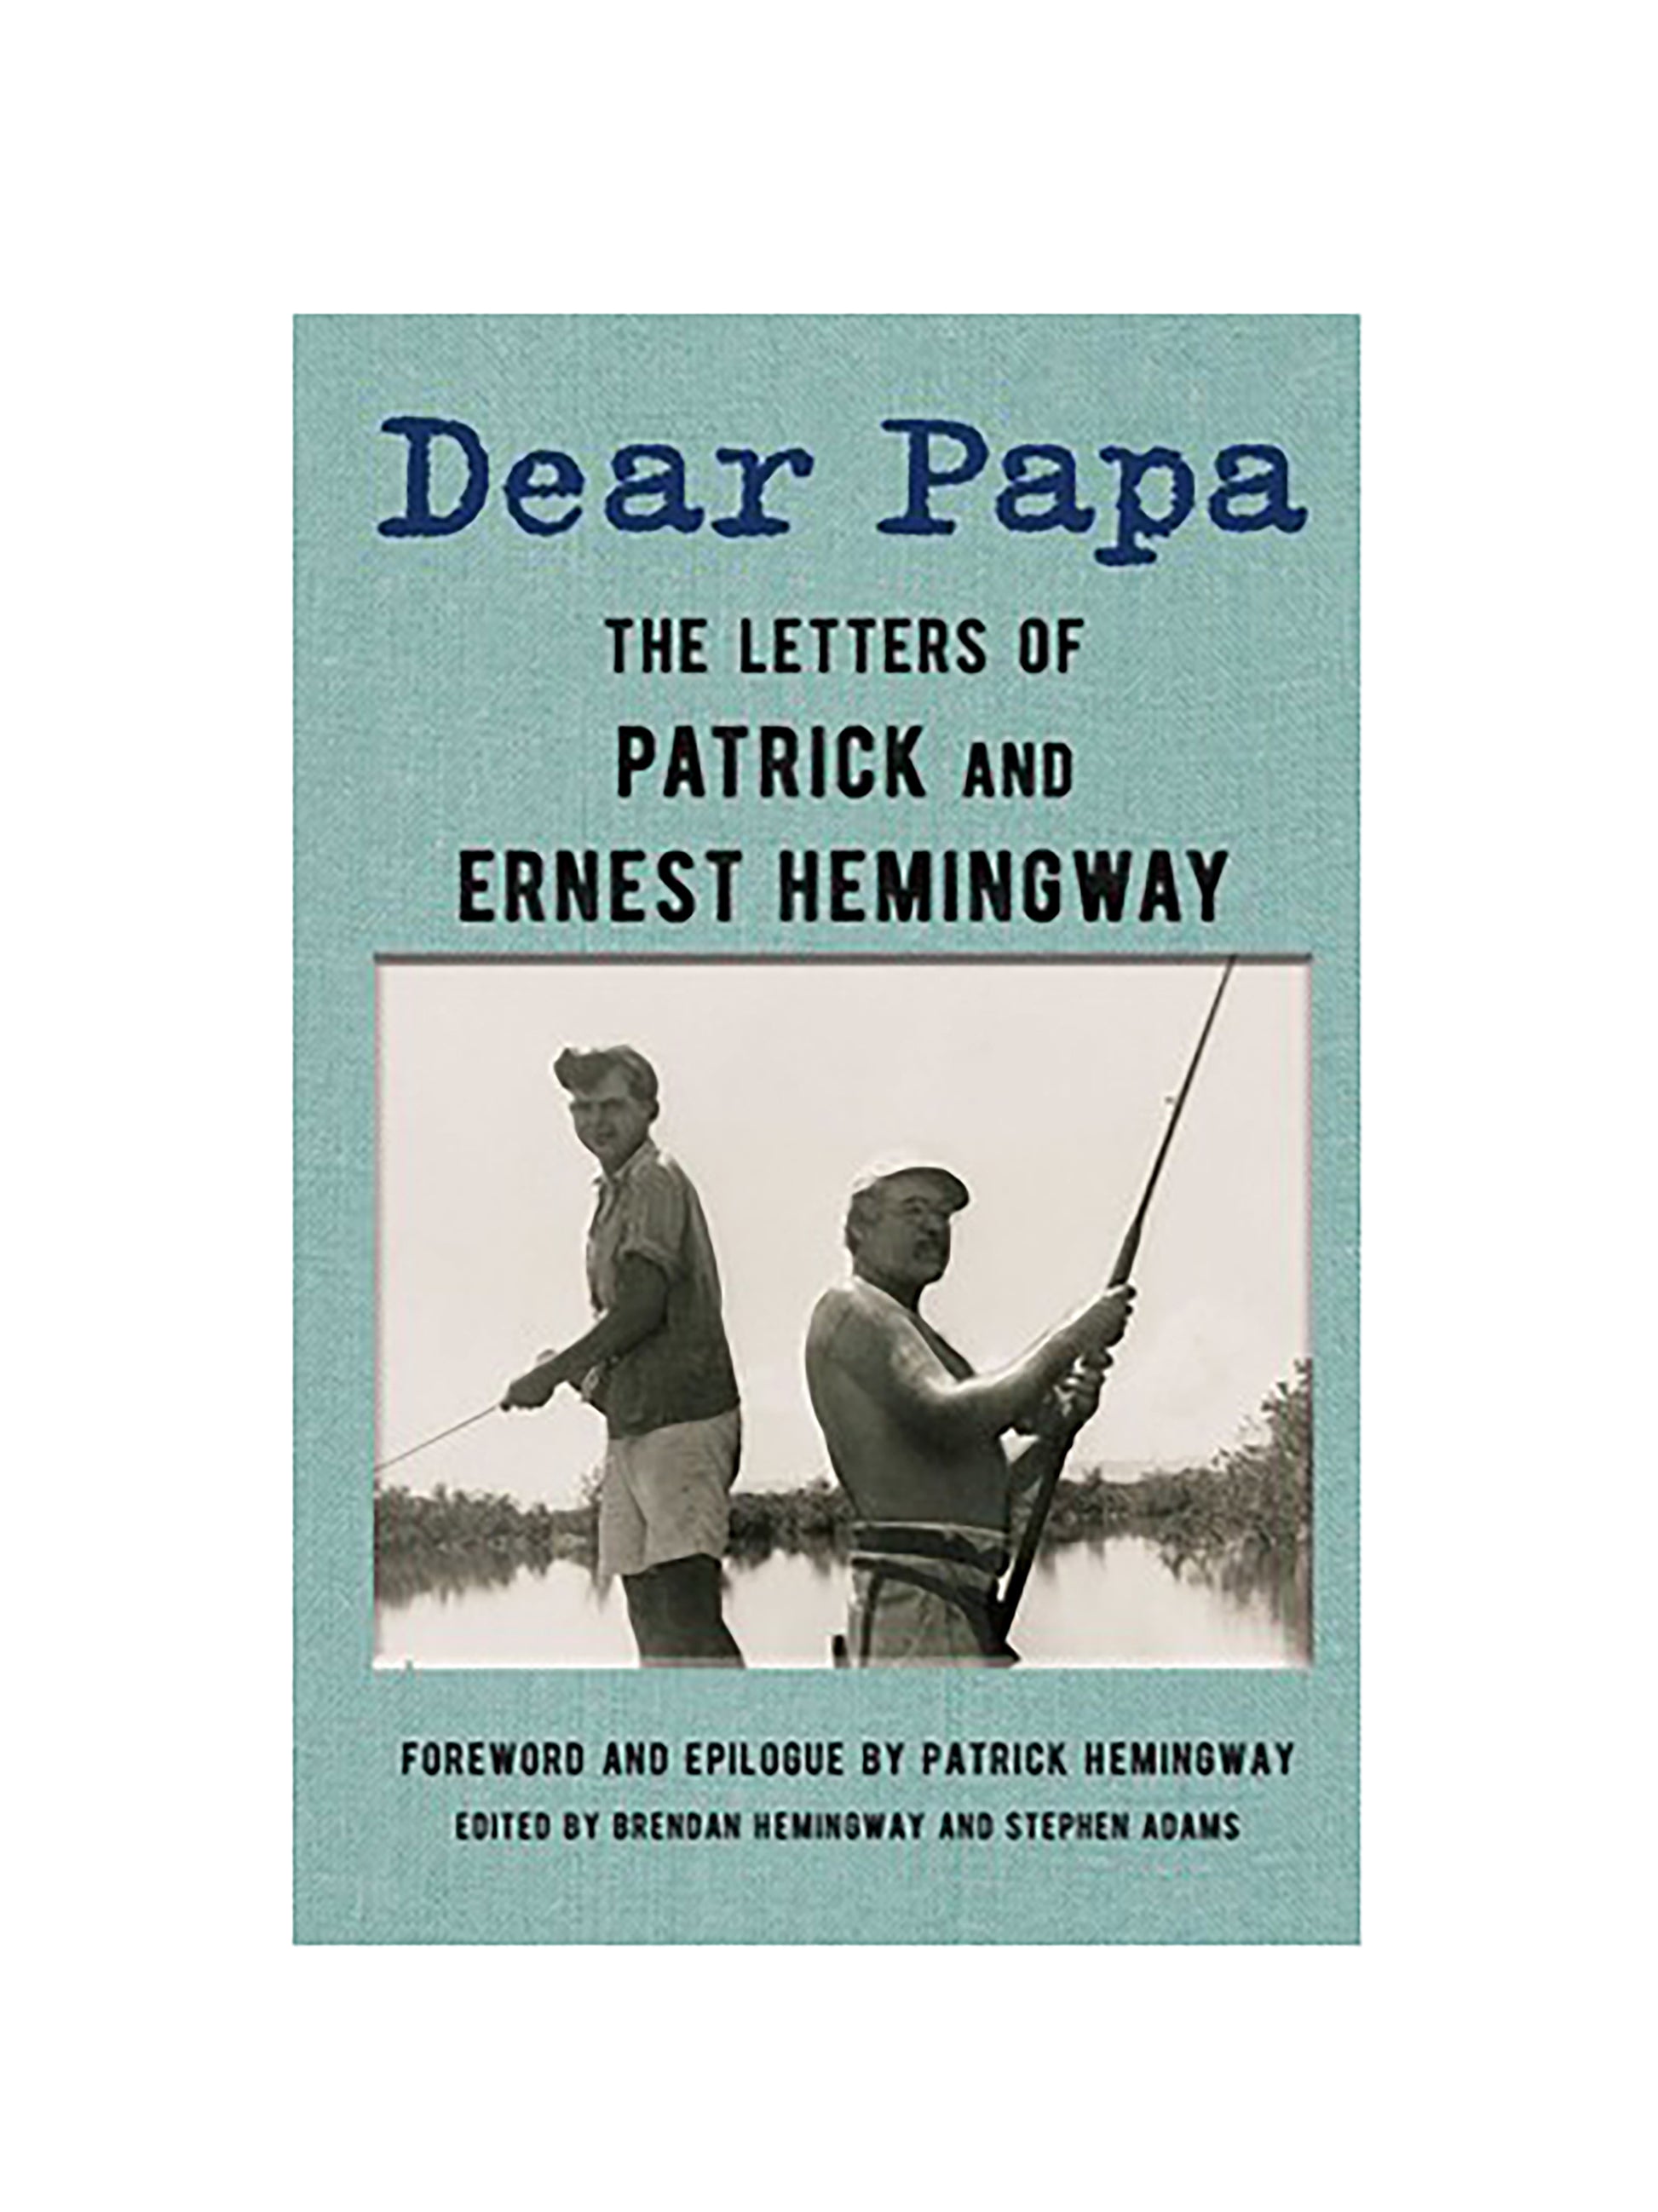 Dear Papa: The Letters of Patrick and Ernest Hemingway [Book]